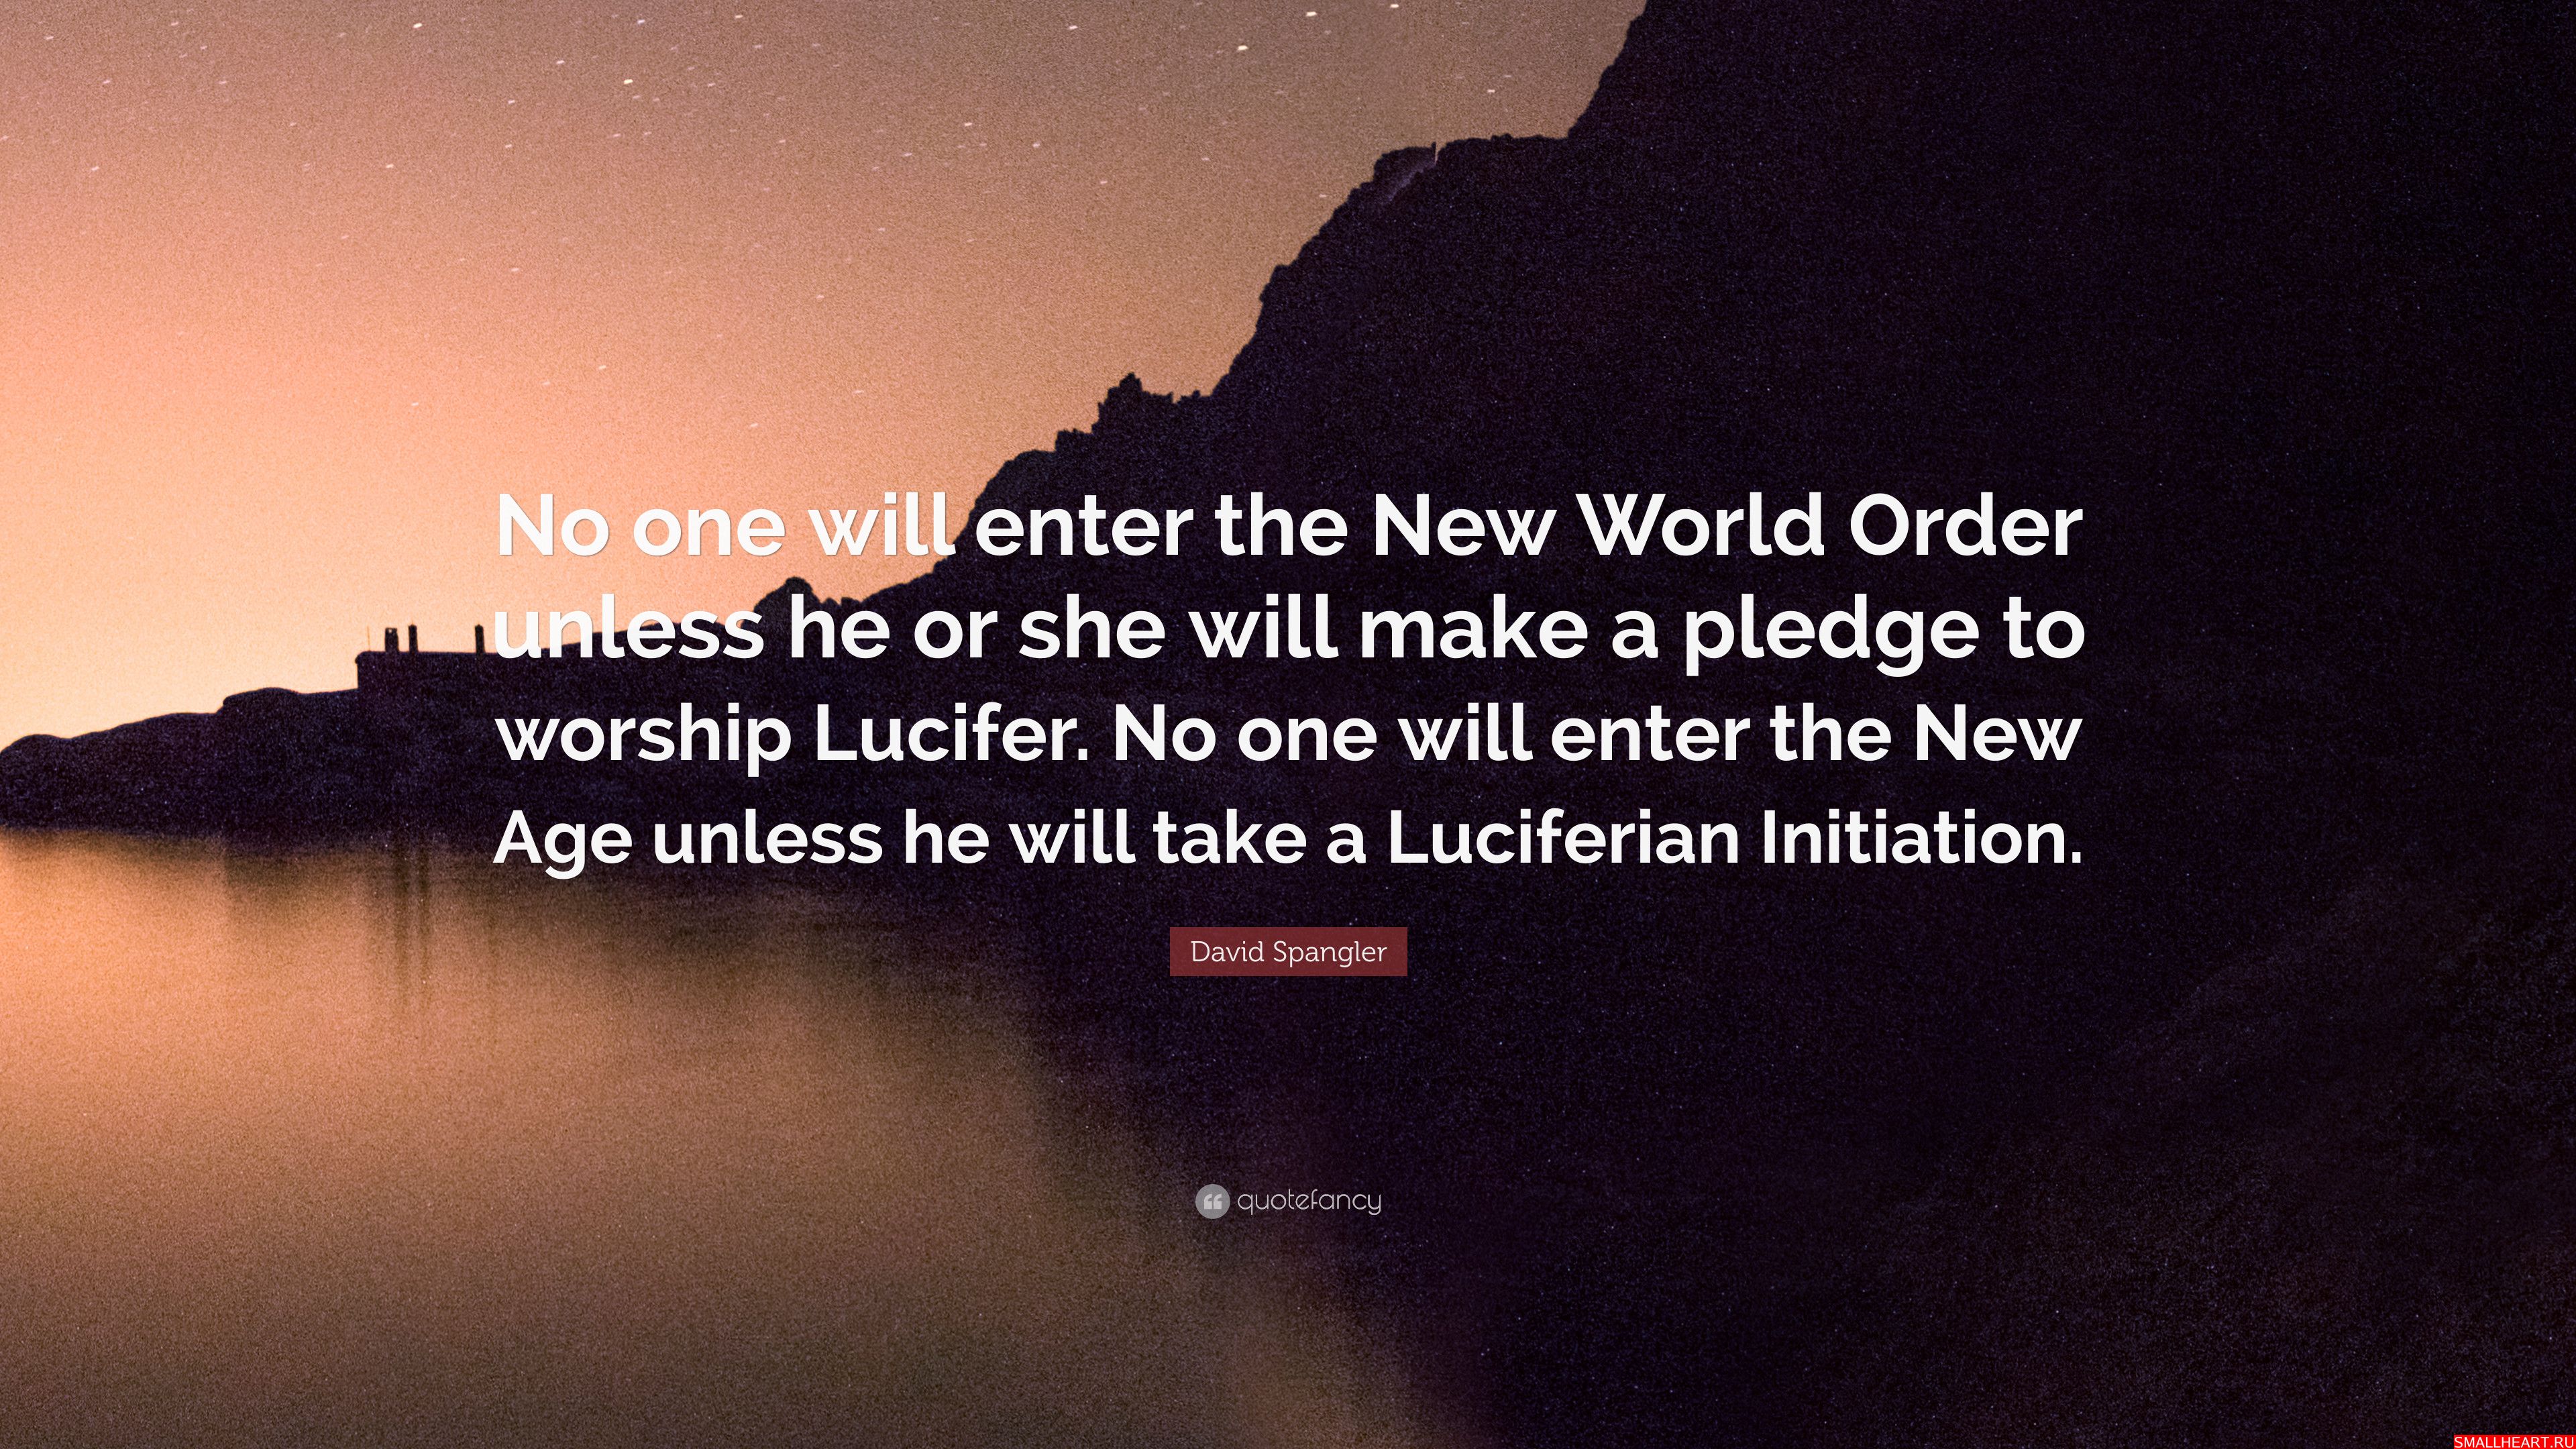 3840x2160 David Spangler Quote: "No one will enter the New World Order...